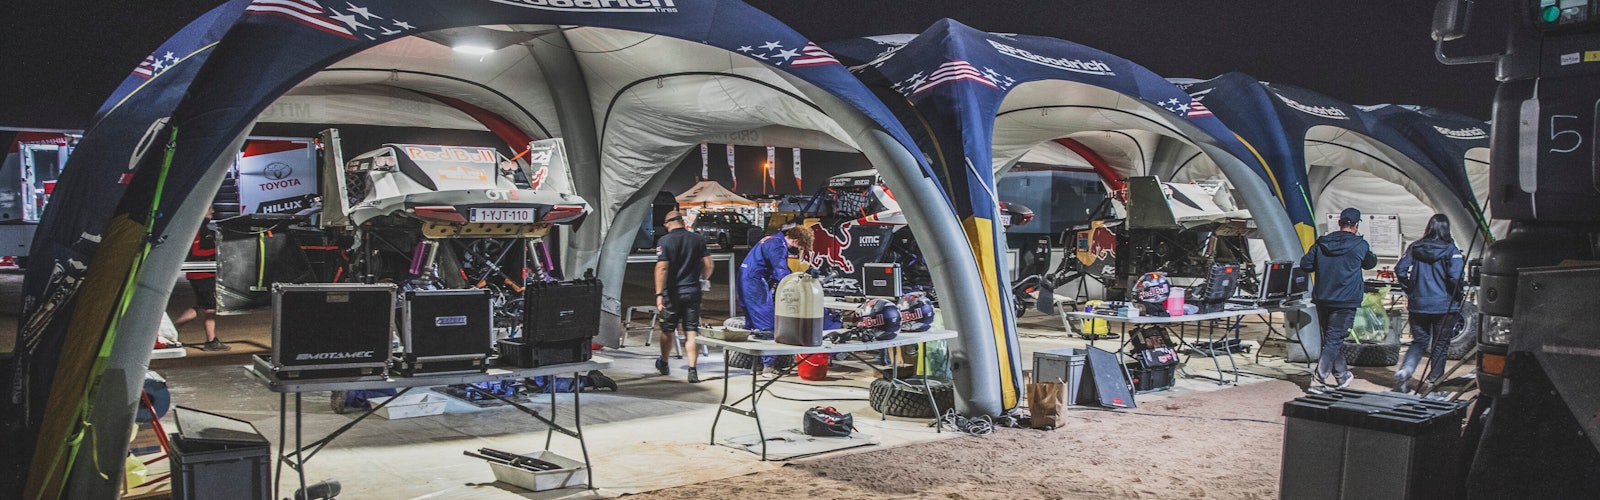 Red Bull Off-Road Team USA